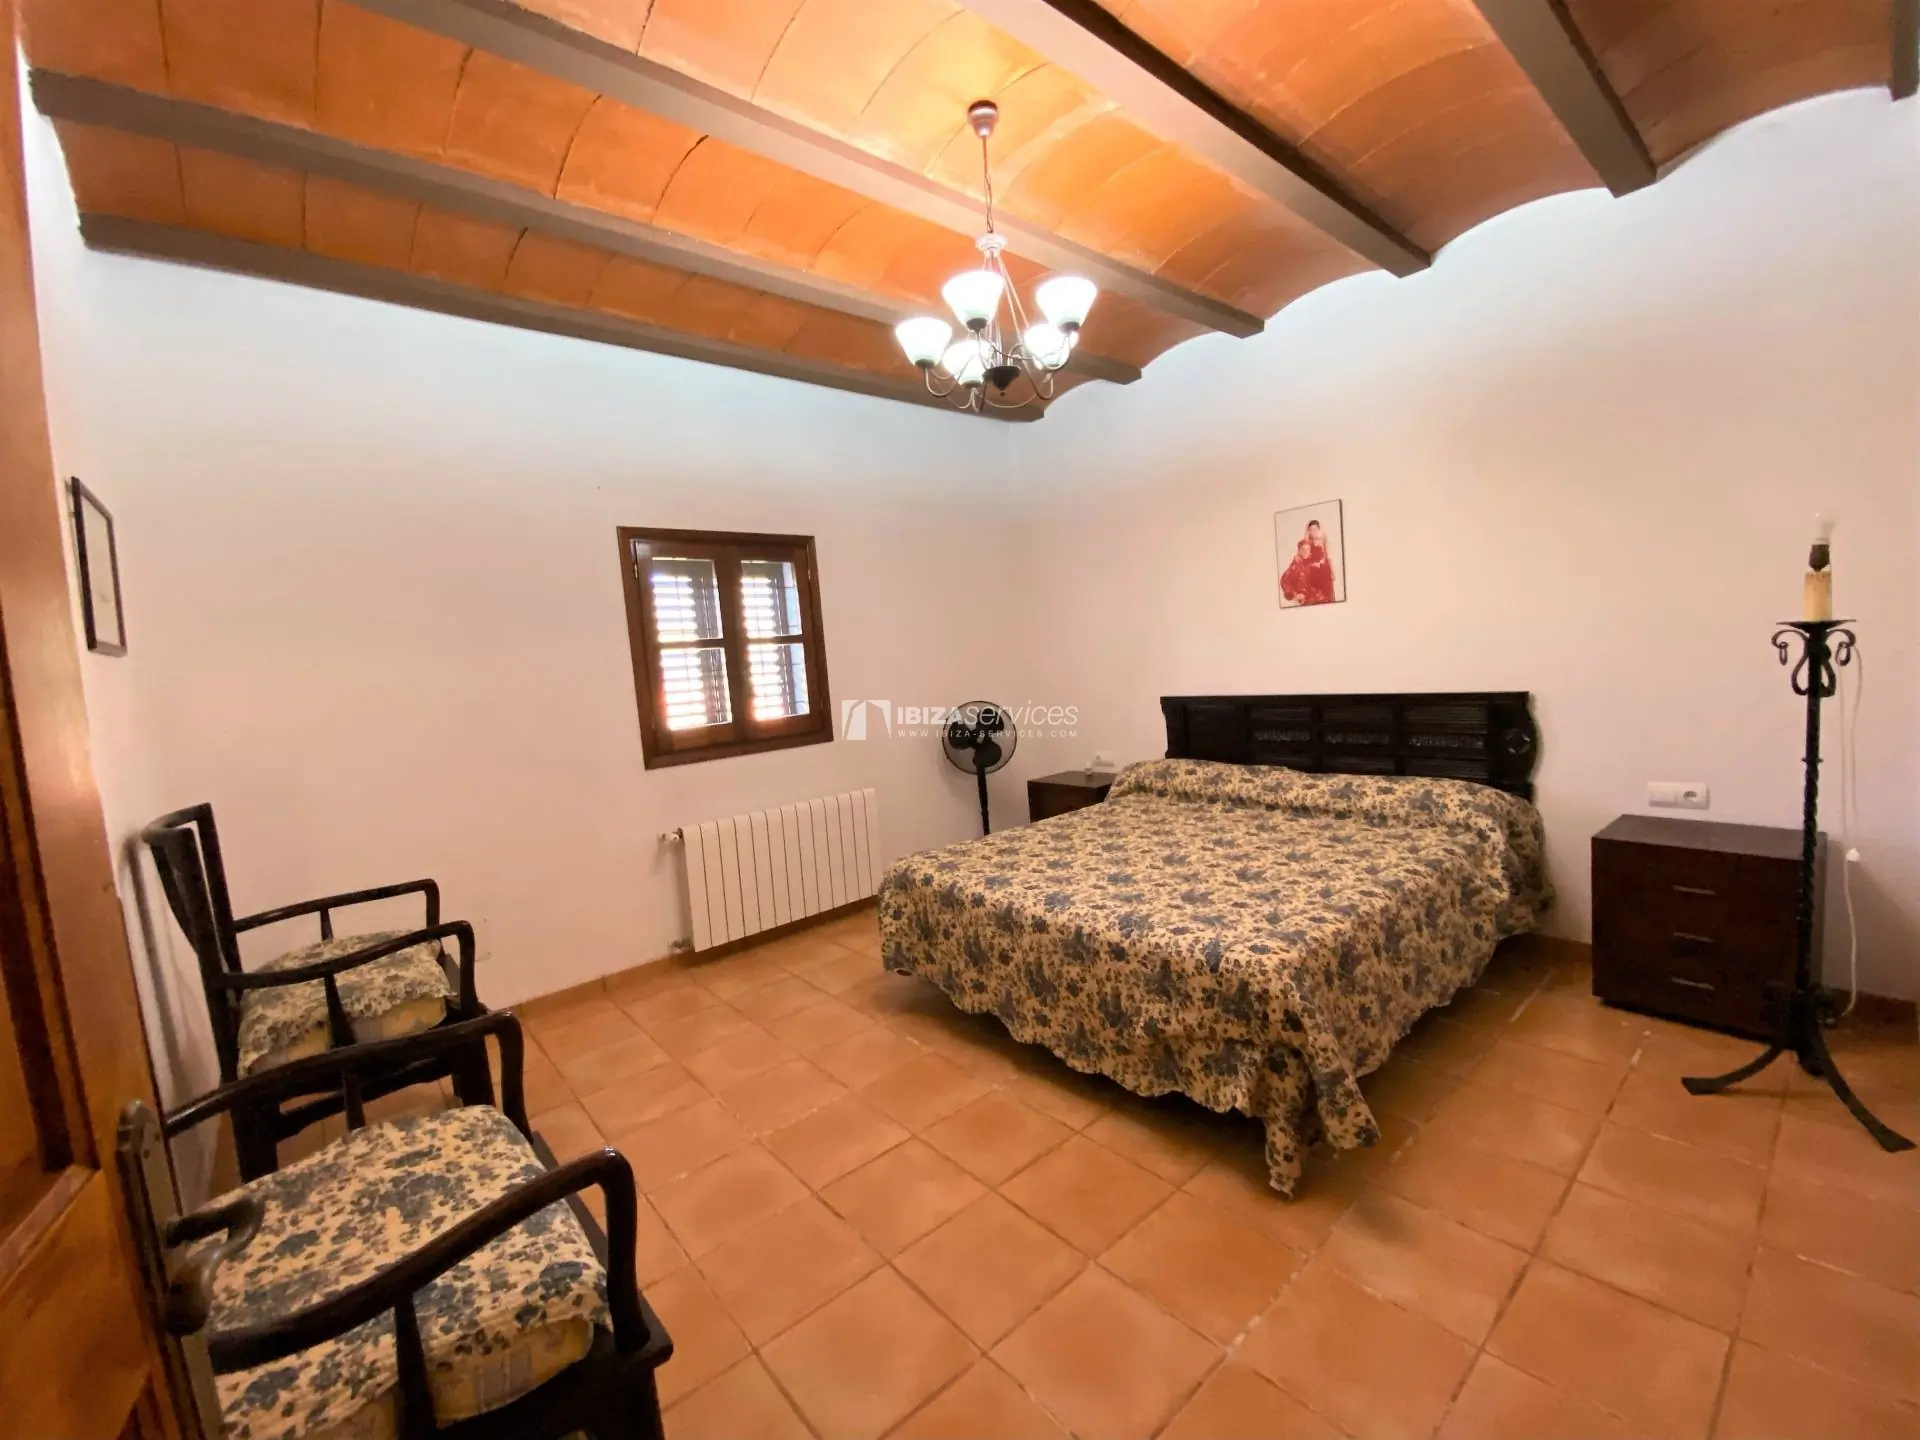 Finca long term rental in the center of the island.